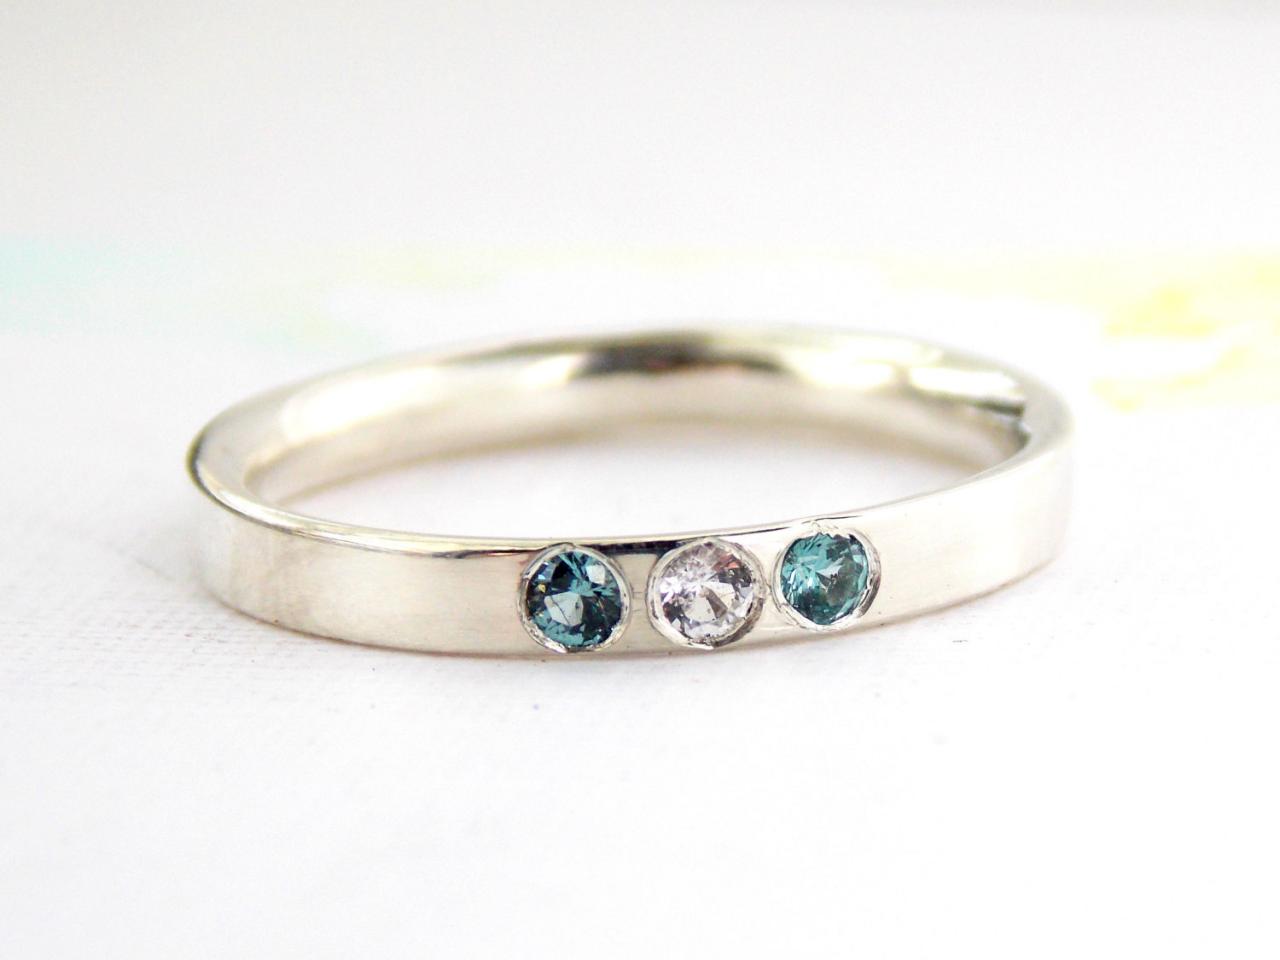 Multistone Inside Out Ring: silver ring, sterling silver ring, dainty ring, comfort fit ring, small ring, birthstone ring, stacking ring